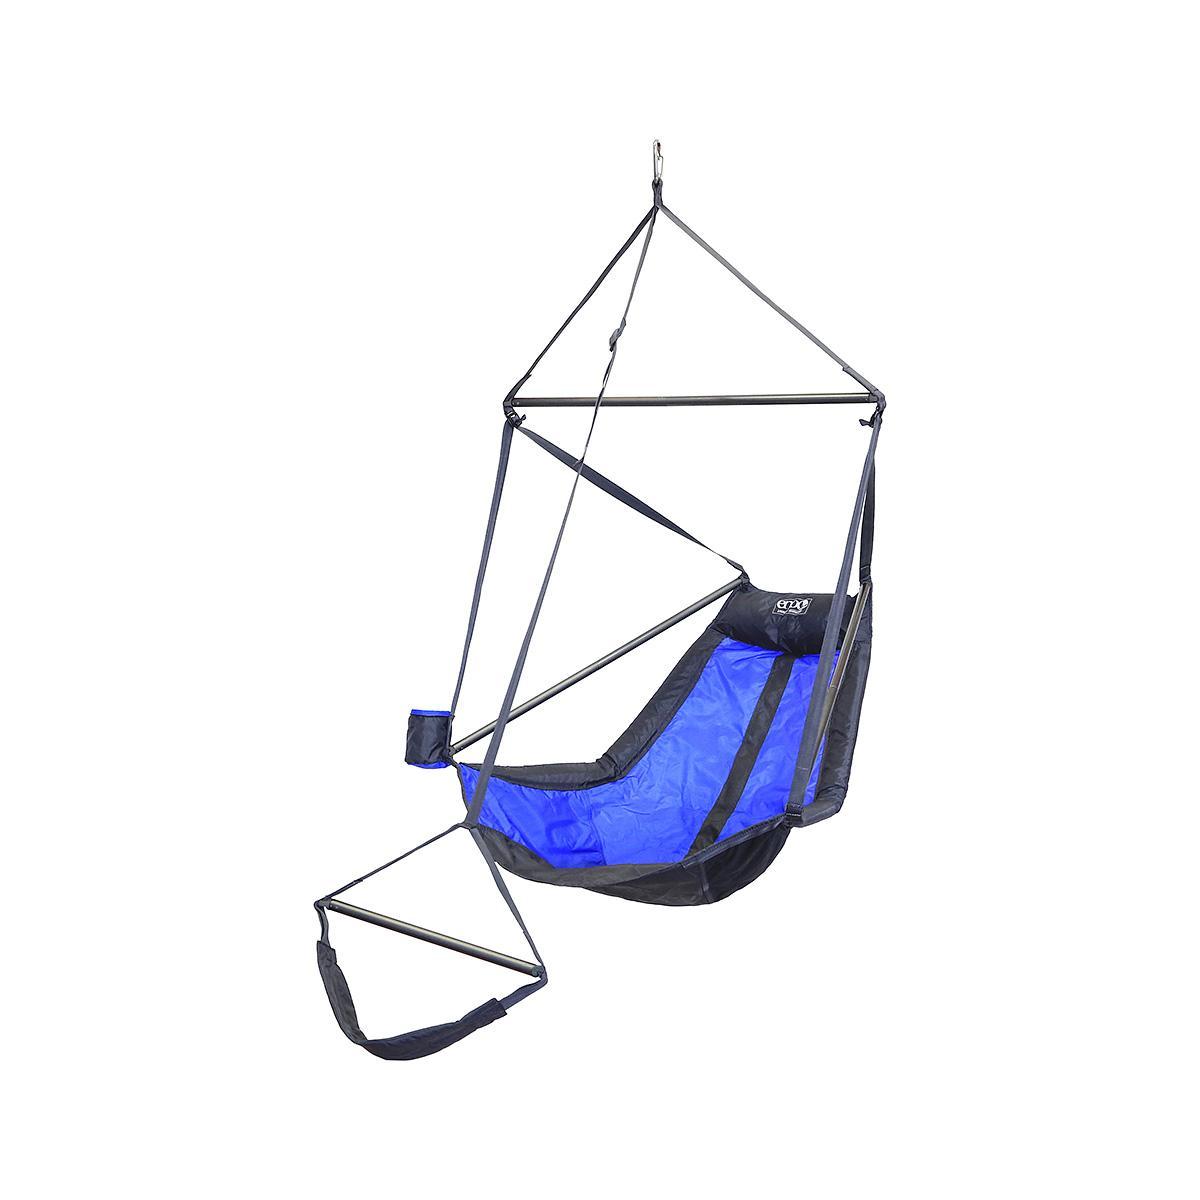  Lounger Hanging Chair